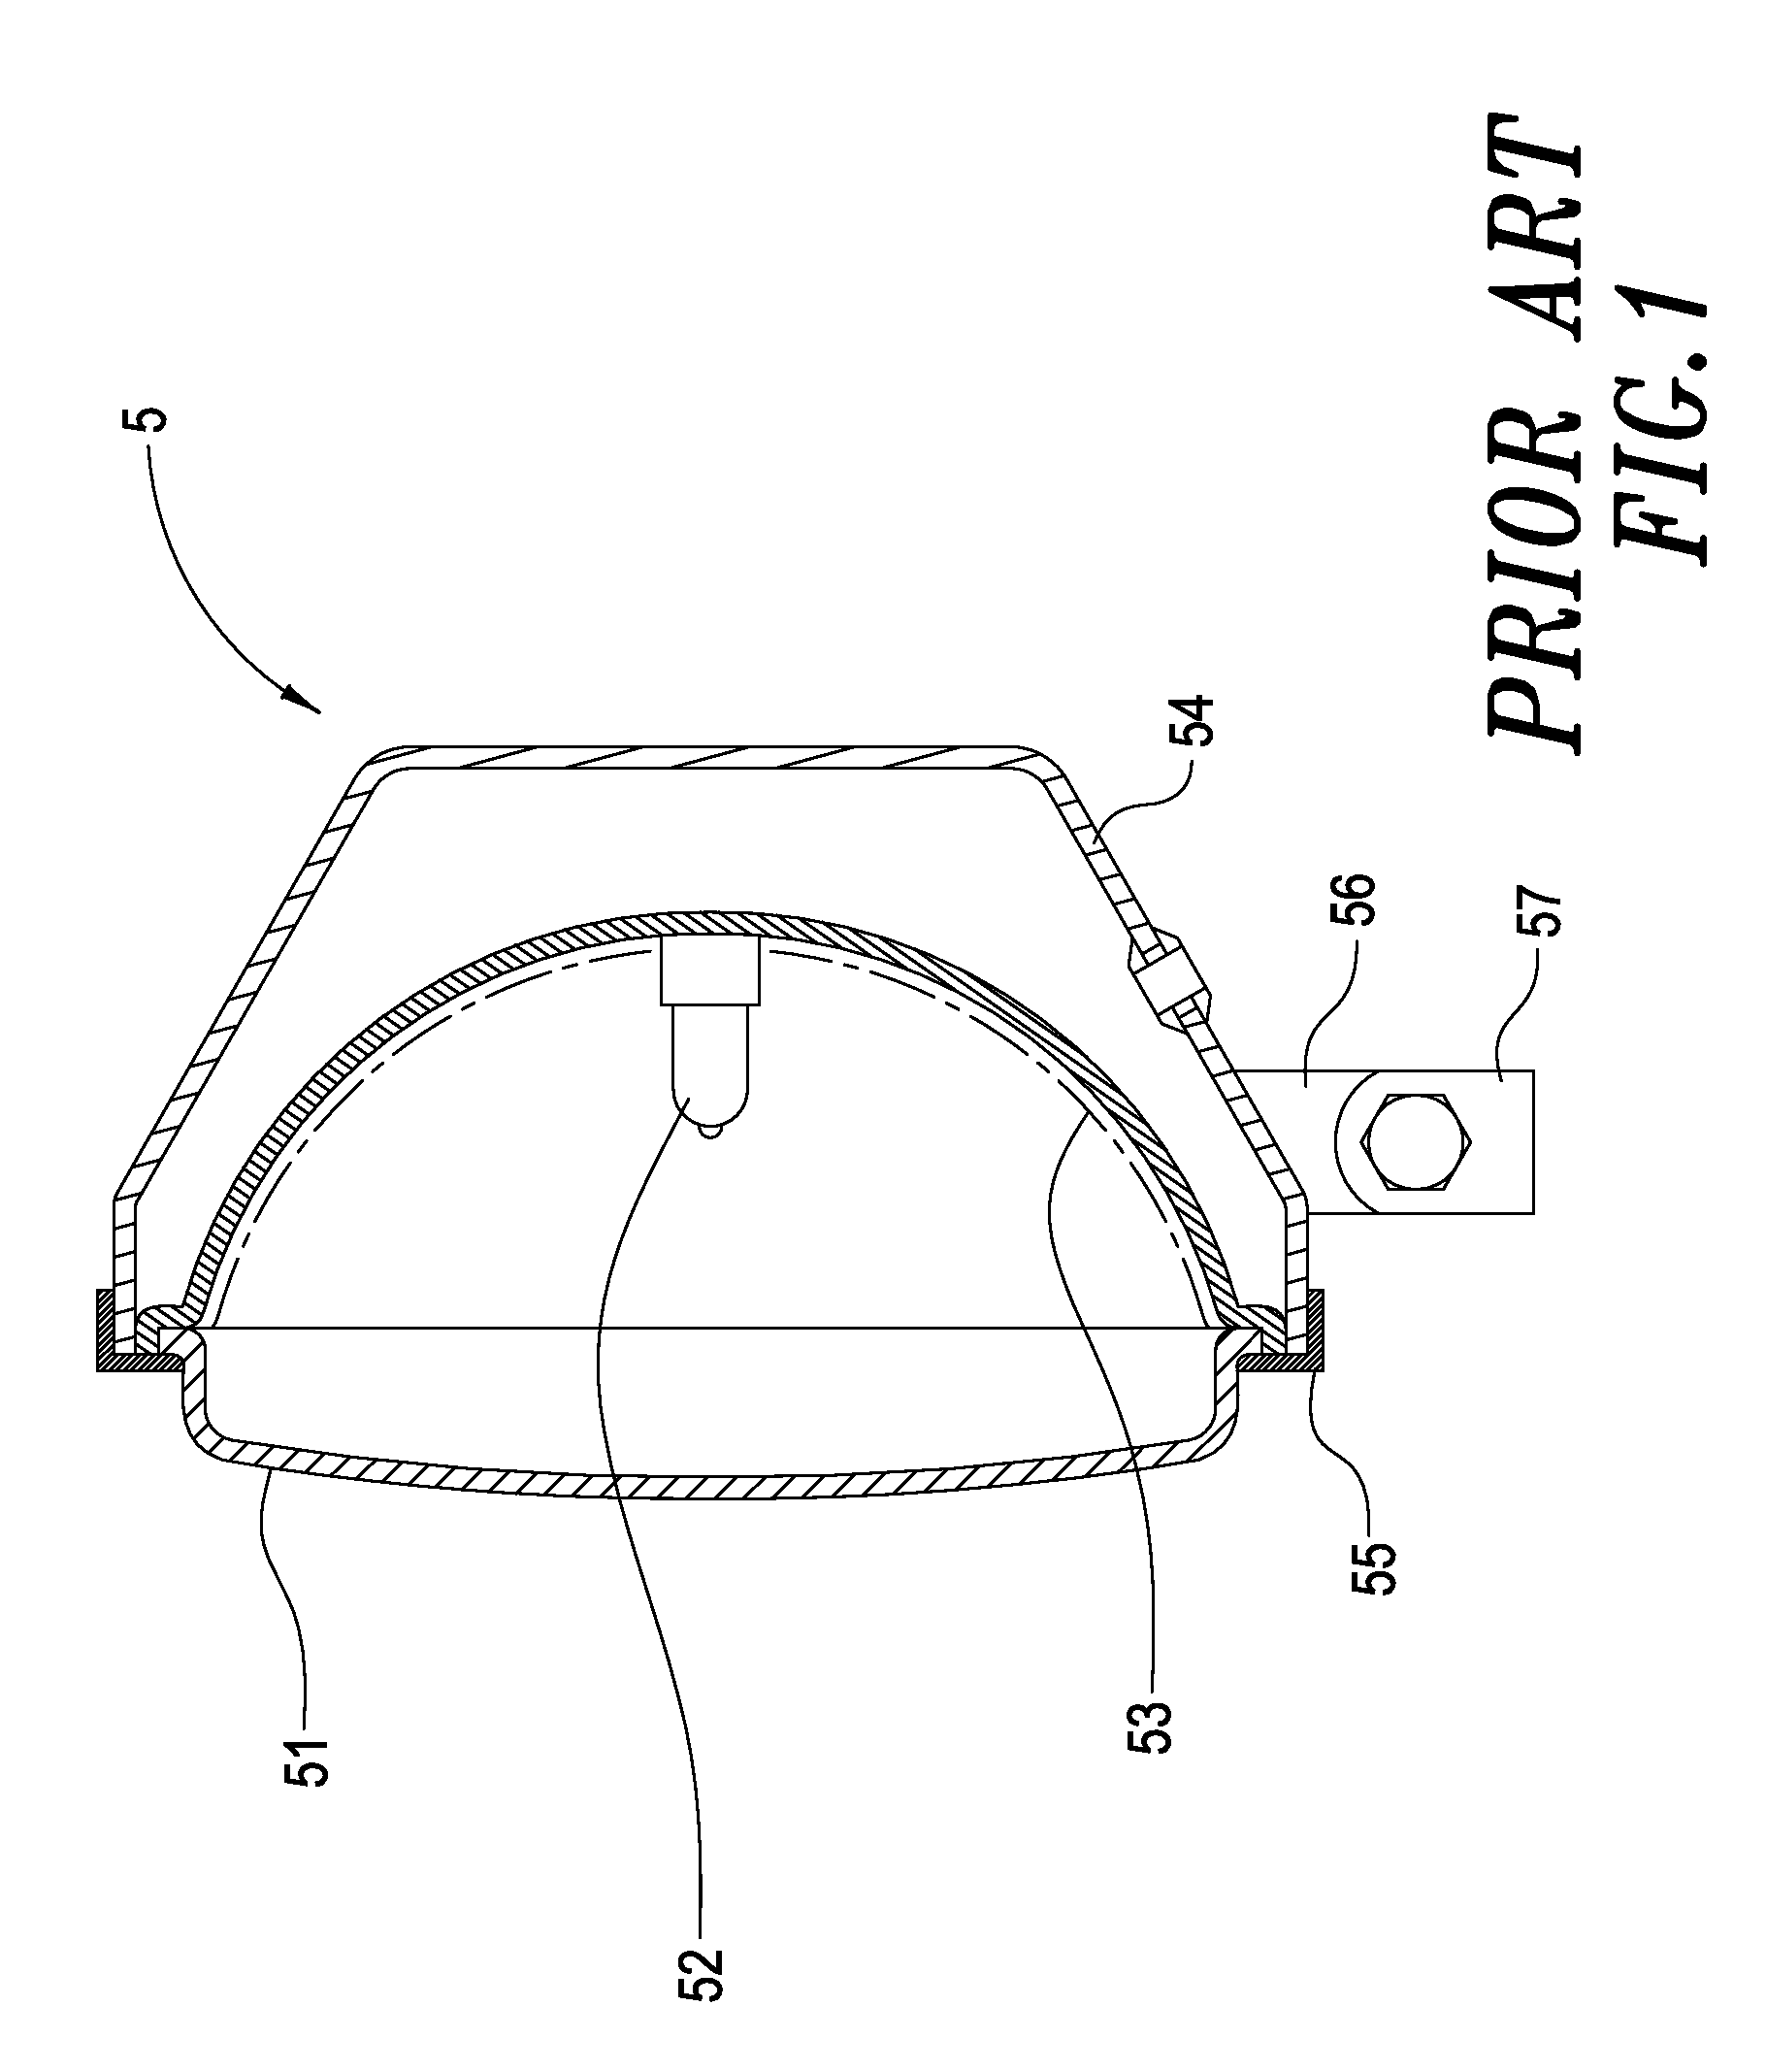 Structure of automobile lamp